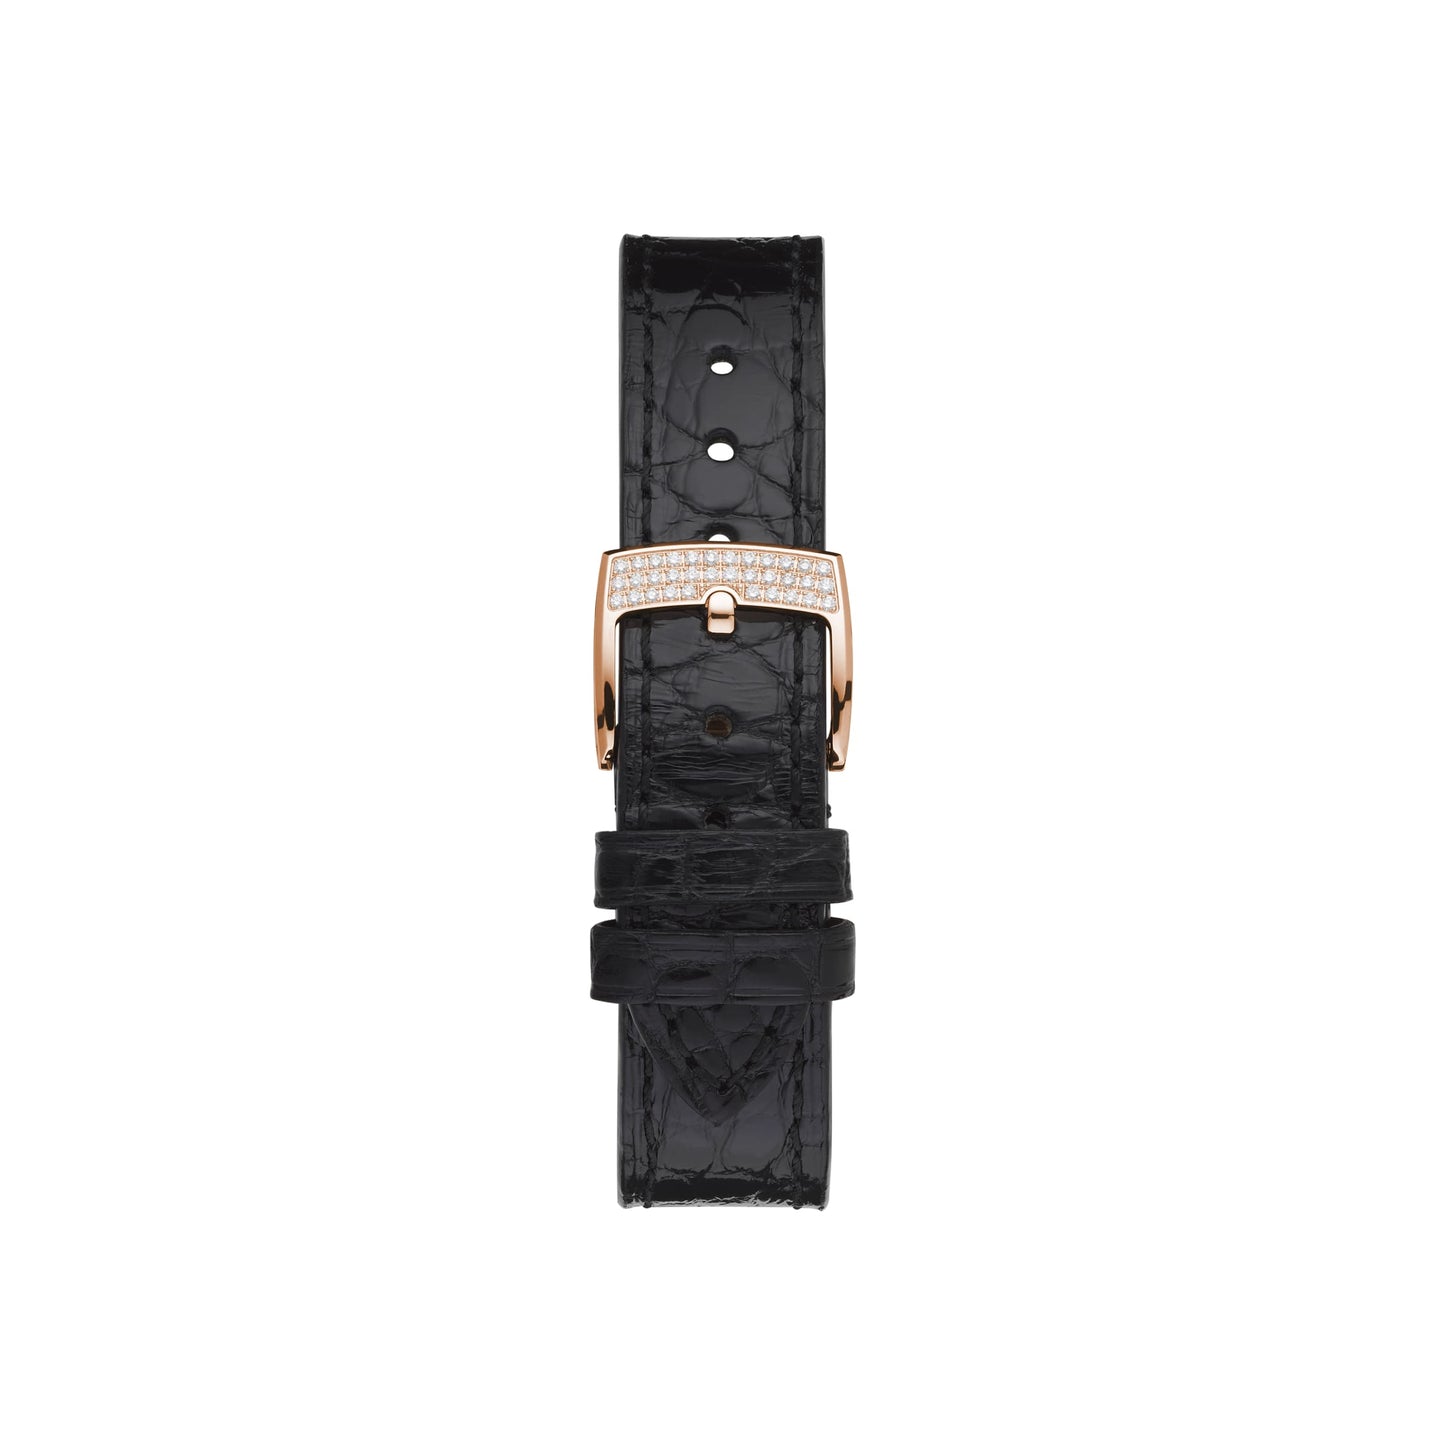 HAPPY SPORT 30 MM, AUTOMATIC, ETHICAL ROSE GOLD, DIAMONDS 274302-5003